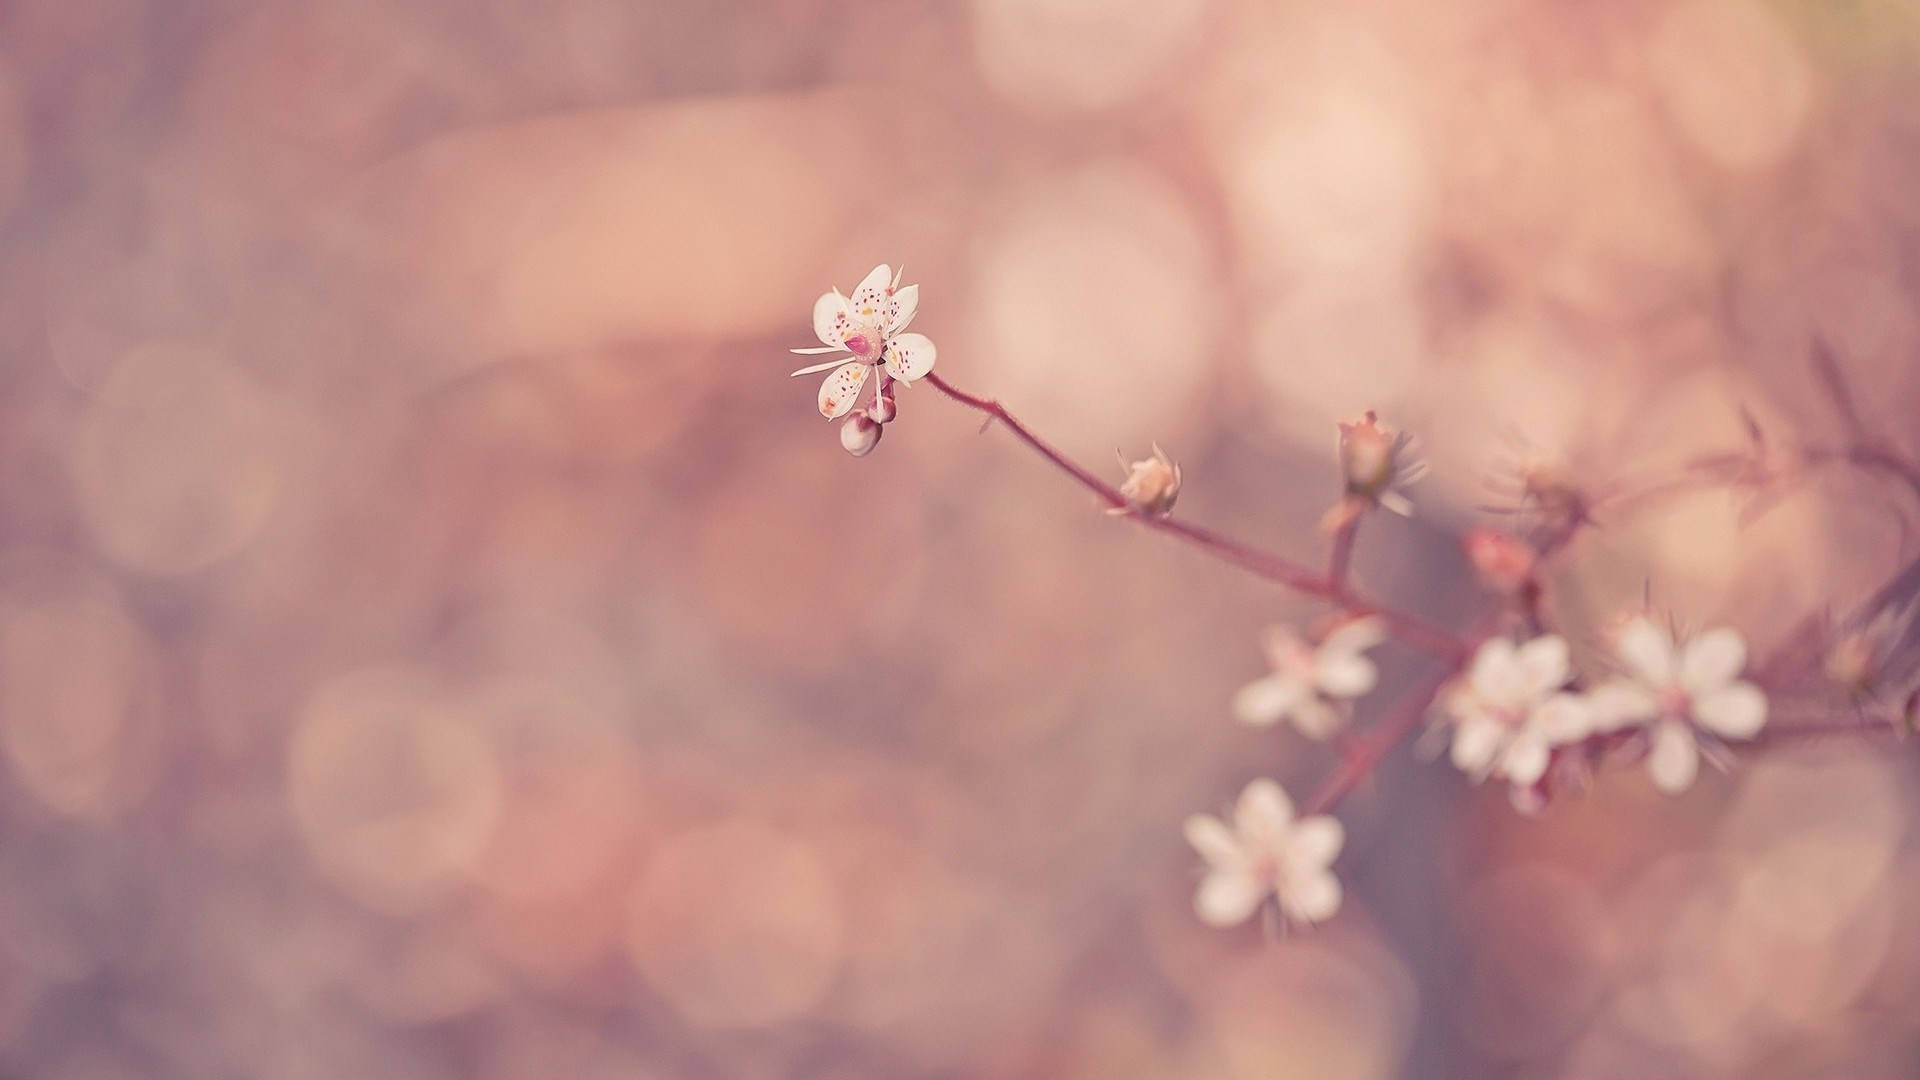 Small Flowers Background Wallpaper